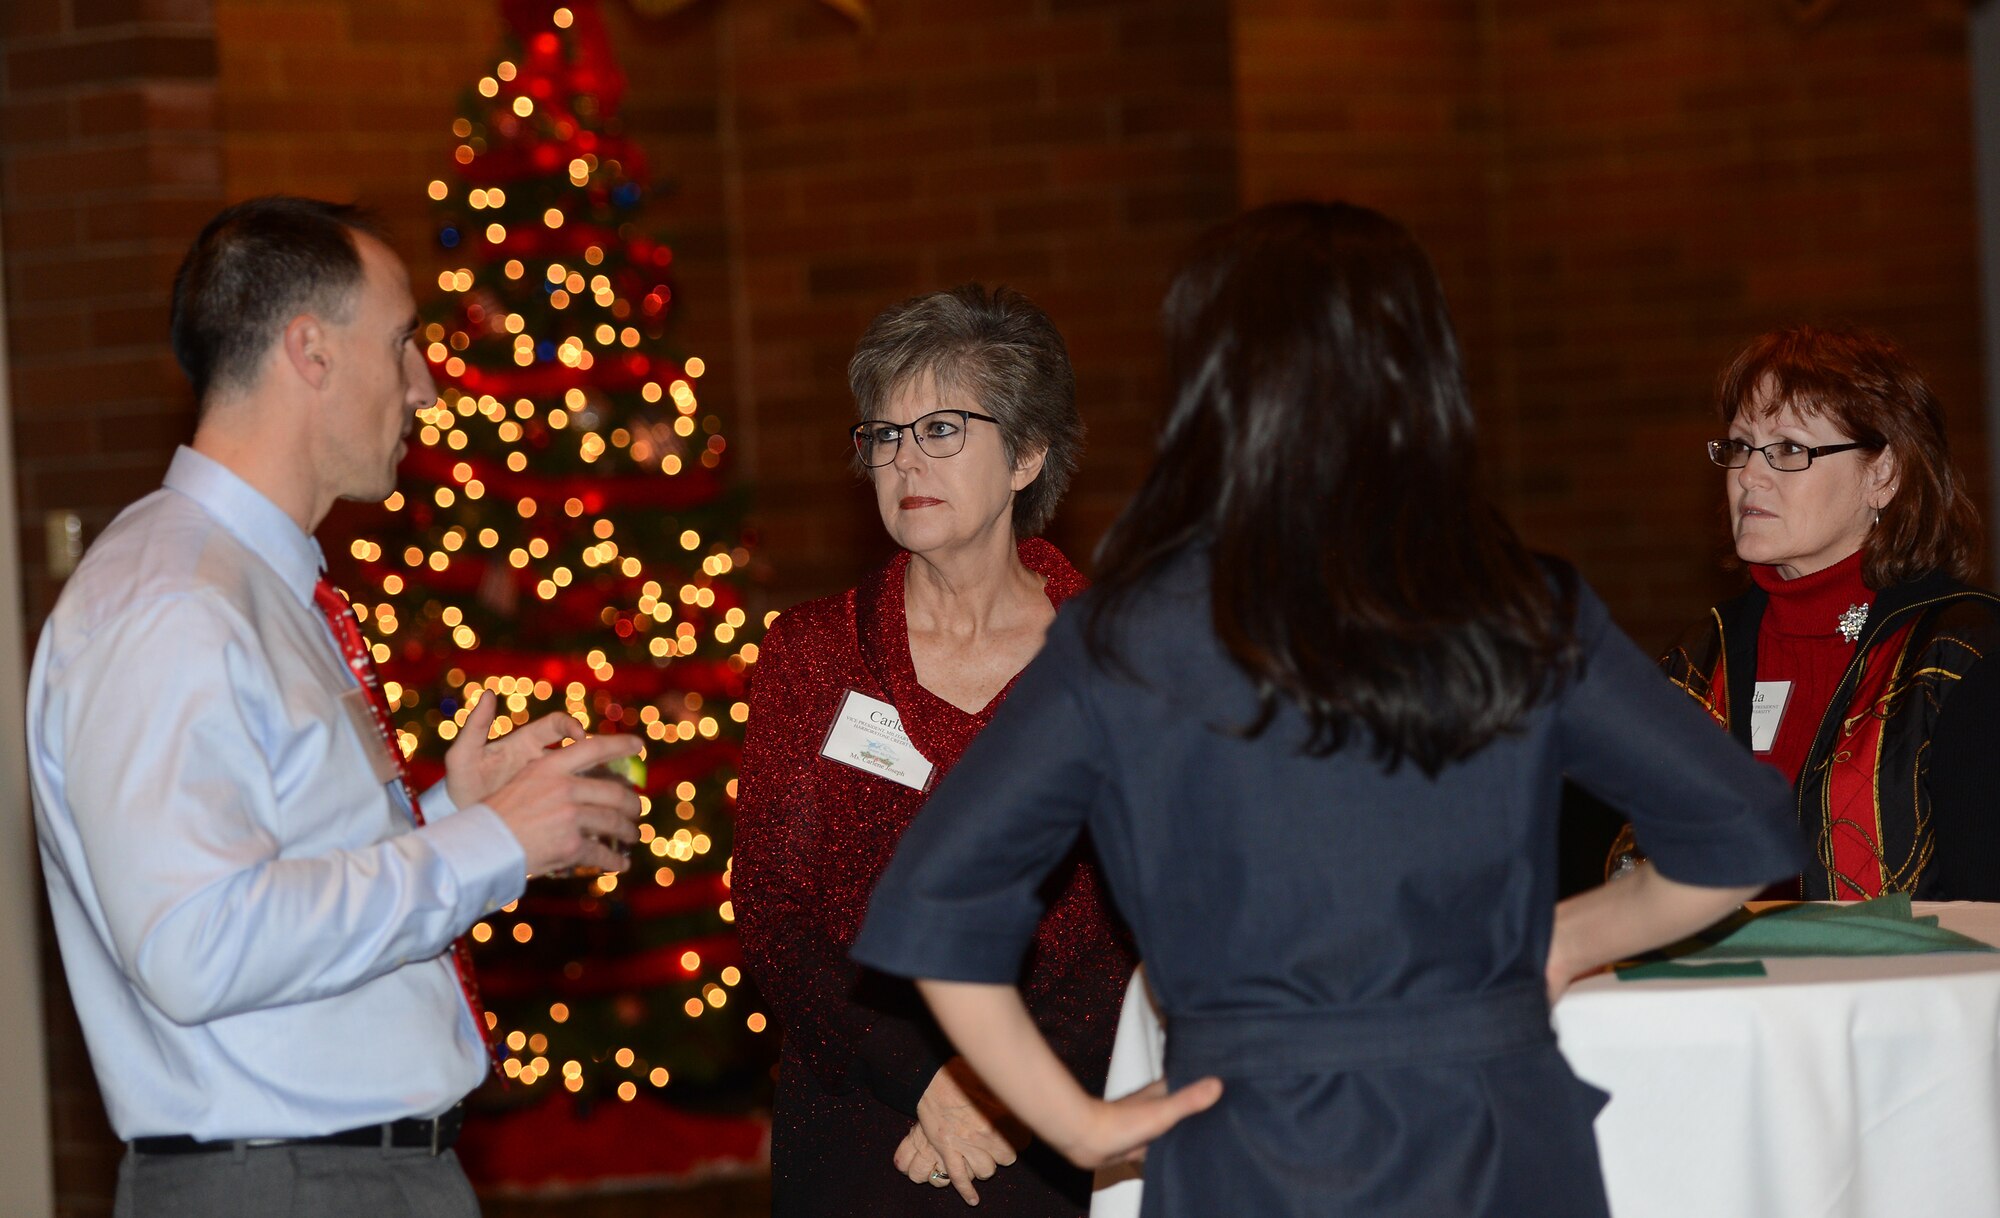 Col. Leonard Kosinski (left), 62nd Airlift Wing commander, talks to Team McChord civic leaders at the Team McChord annual civic leader holiday party Dec. 10, 2016, at the McChord Club on Joint Base Lewis-McChord, Wash. The annual event is held yearly to thank civic leaders for their support throughout the year. (U.S. Air Force photo/Senior Airman Jacob Jimenez)  